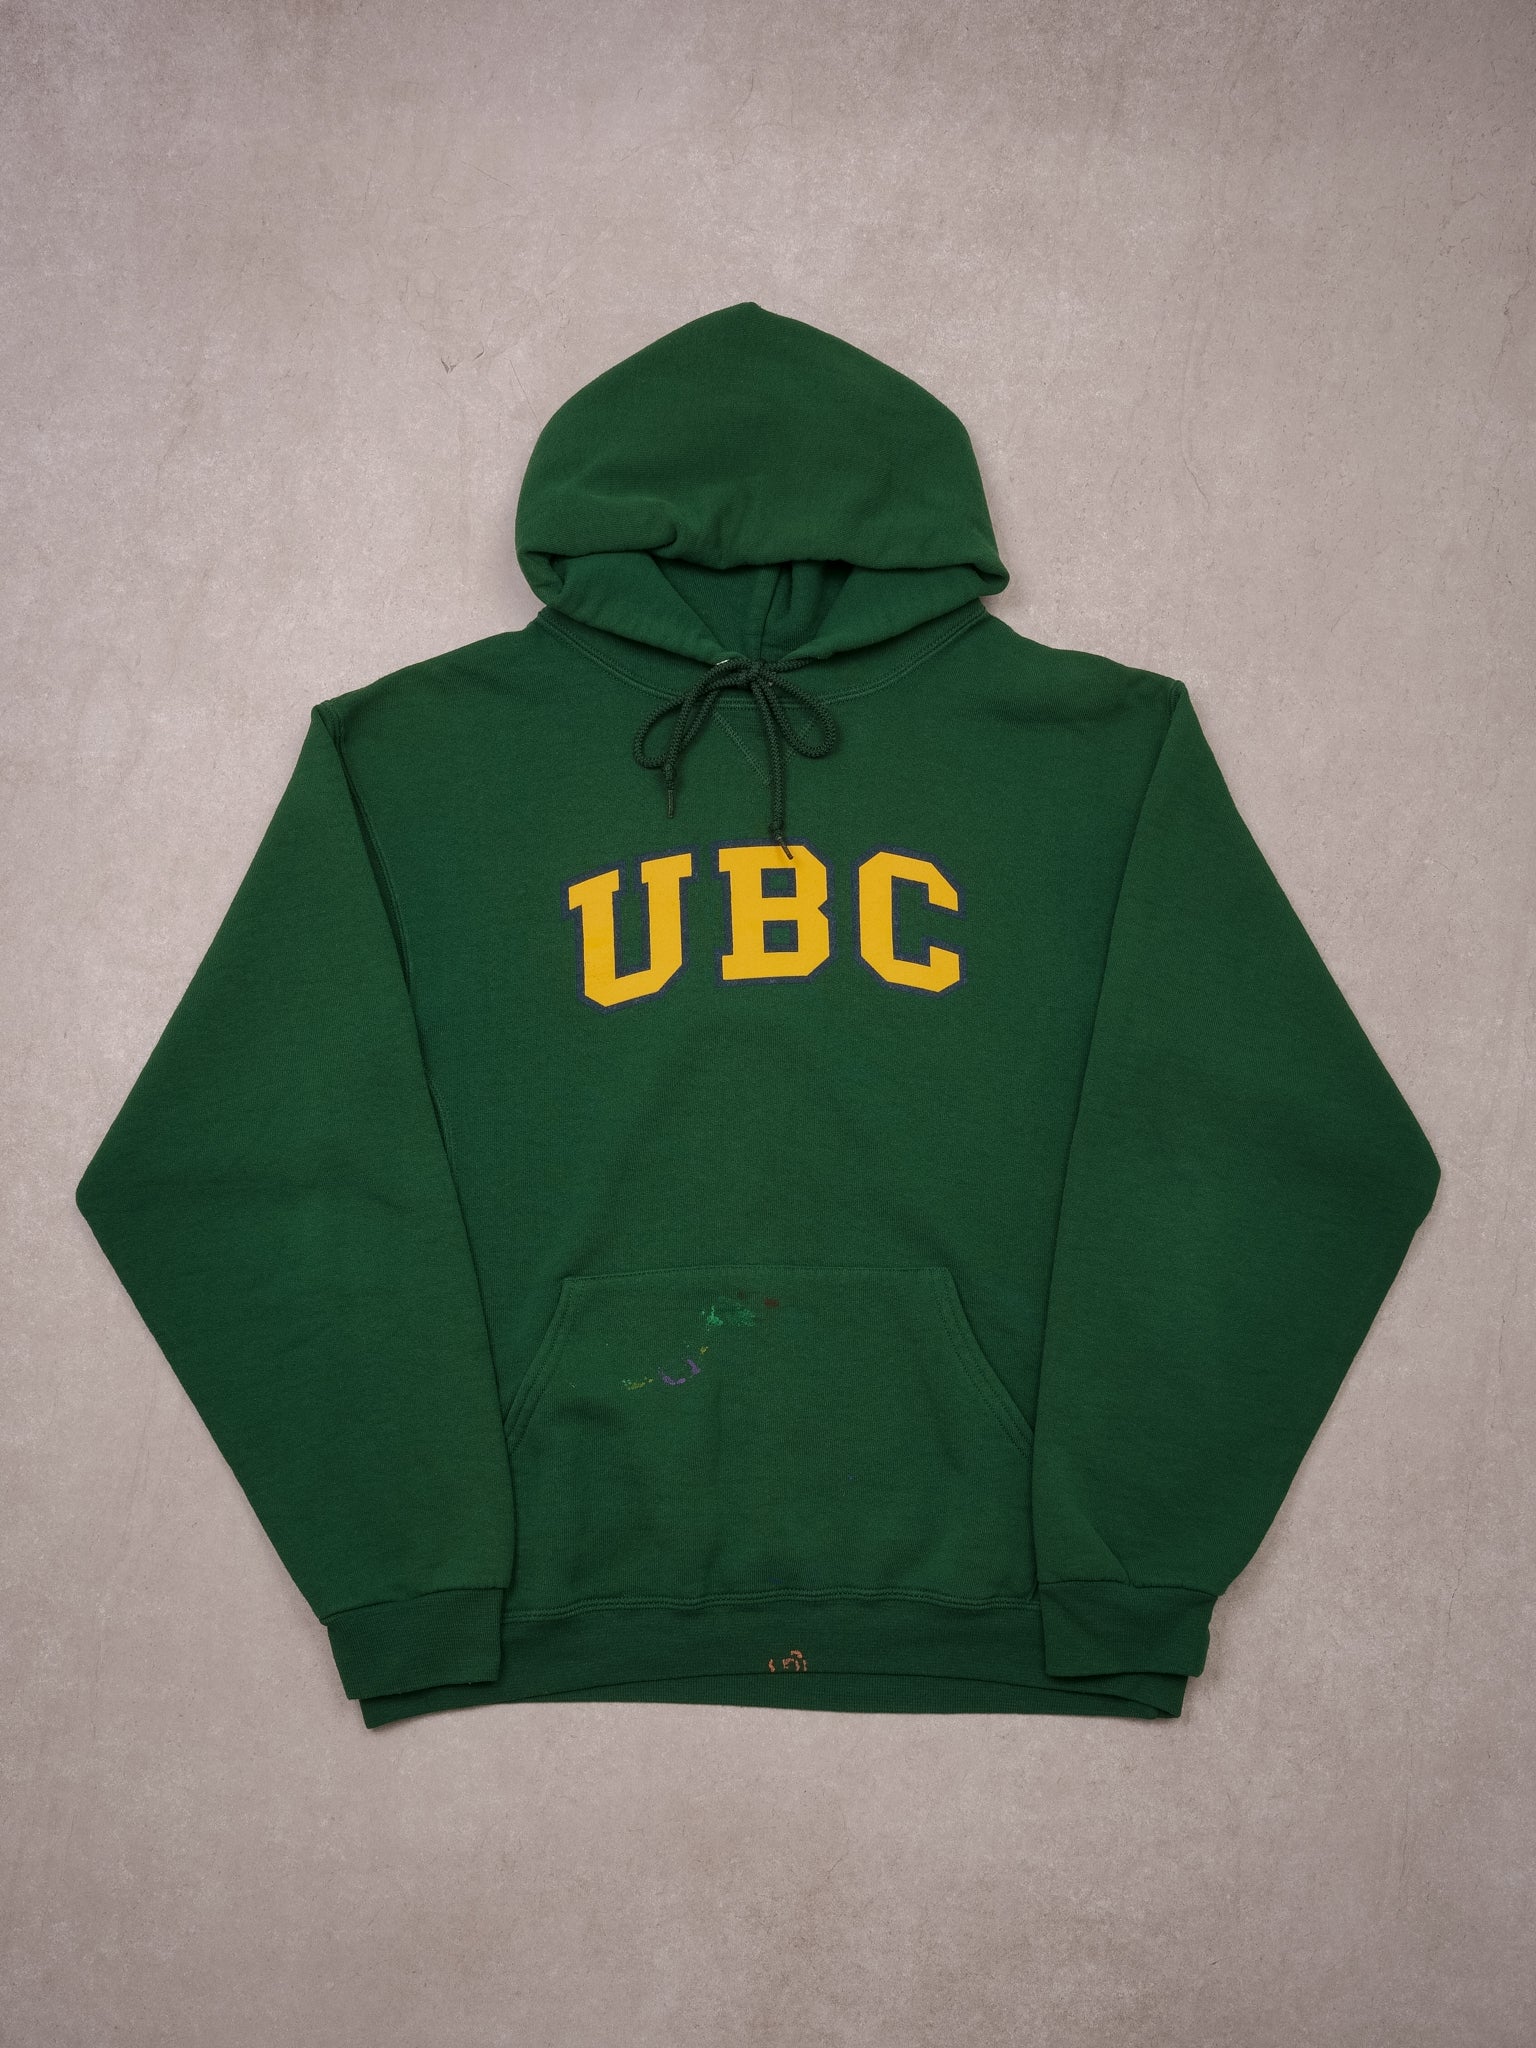 Vintage 90s Pine Green UBC Russell Althetic's Hoodie (M)